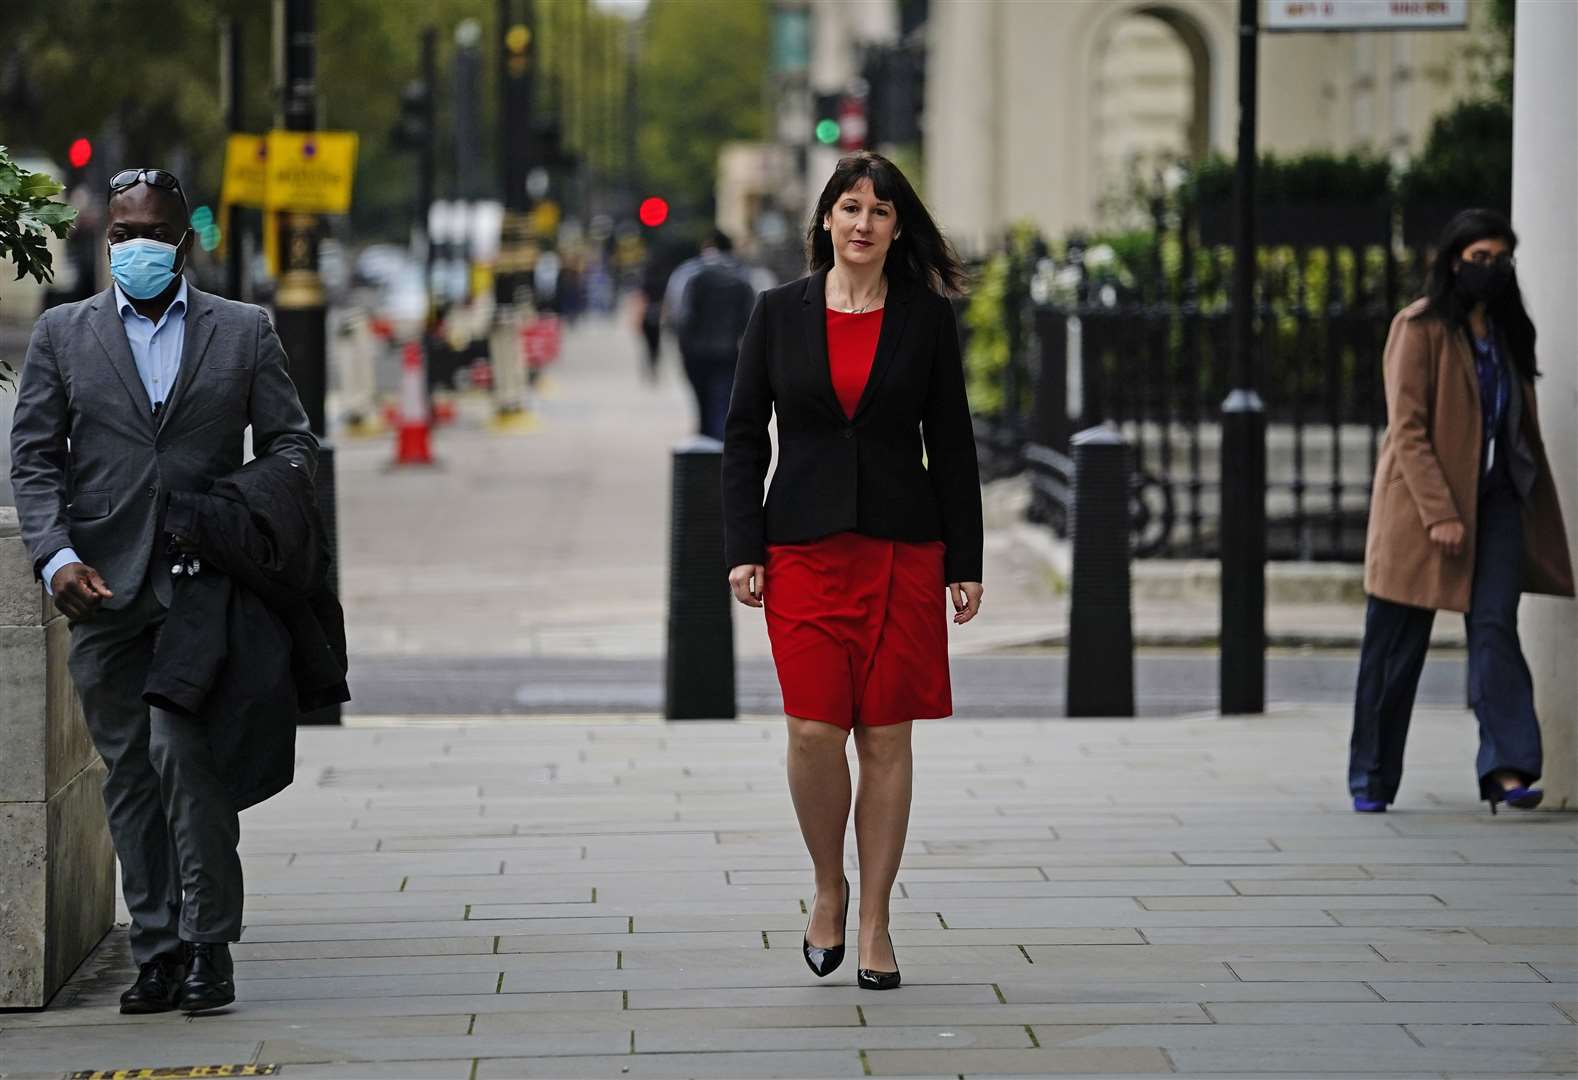 Shadow chancellor of the exchequer Rachel Reeves arrives at BBC Broadcasting House, London, to appear on the BBC1 current affairs programme, The Andrew Marr show. (Aaron Chown/PA)